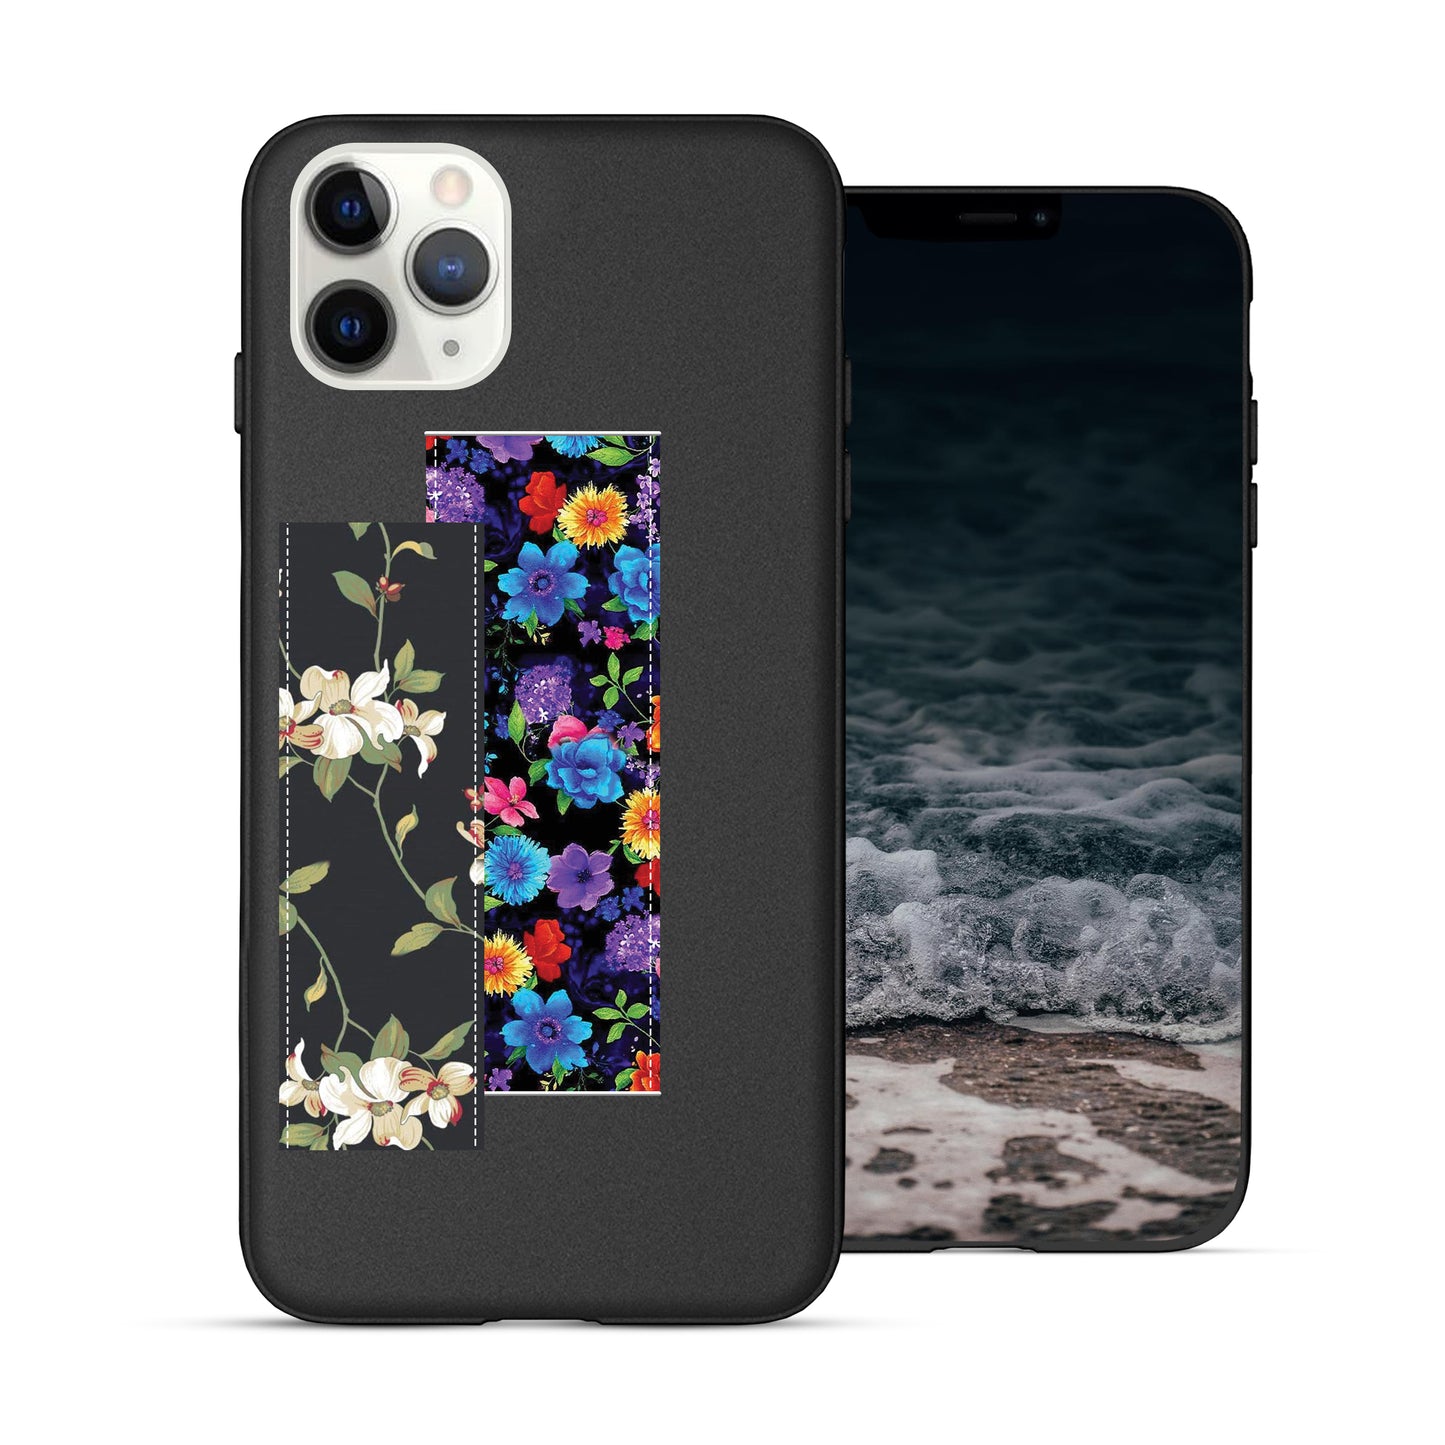 Finger Loop Phone Case For iPhone 11 Pro Max Black With Custom Strap